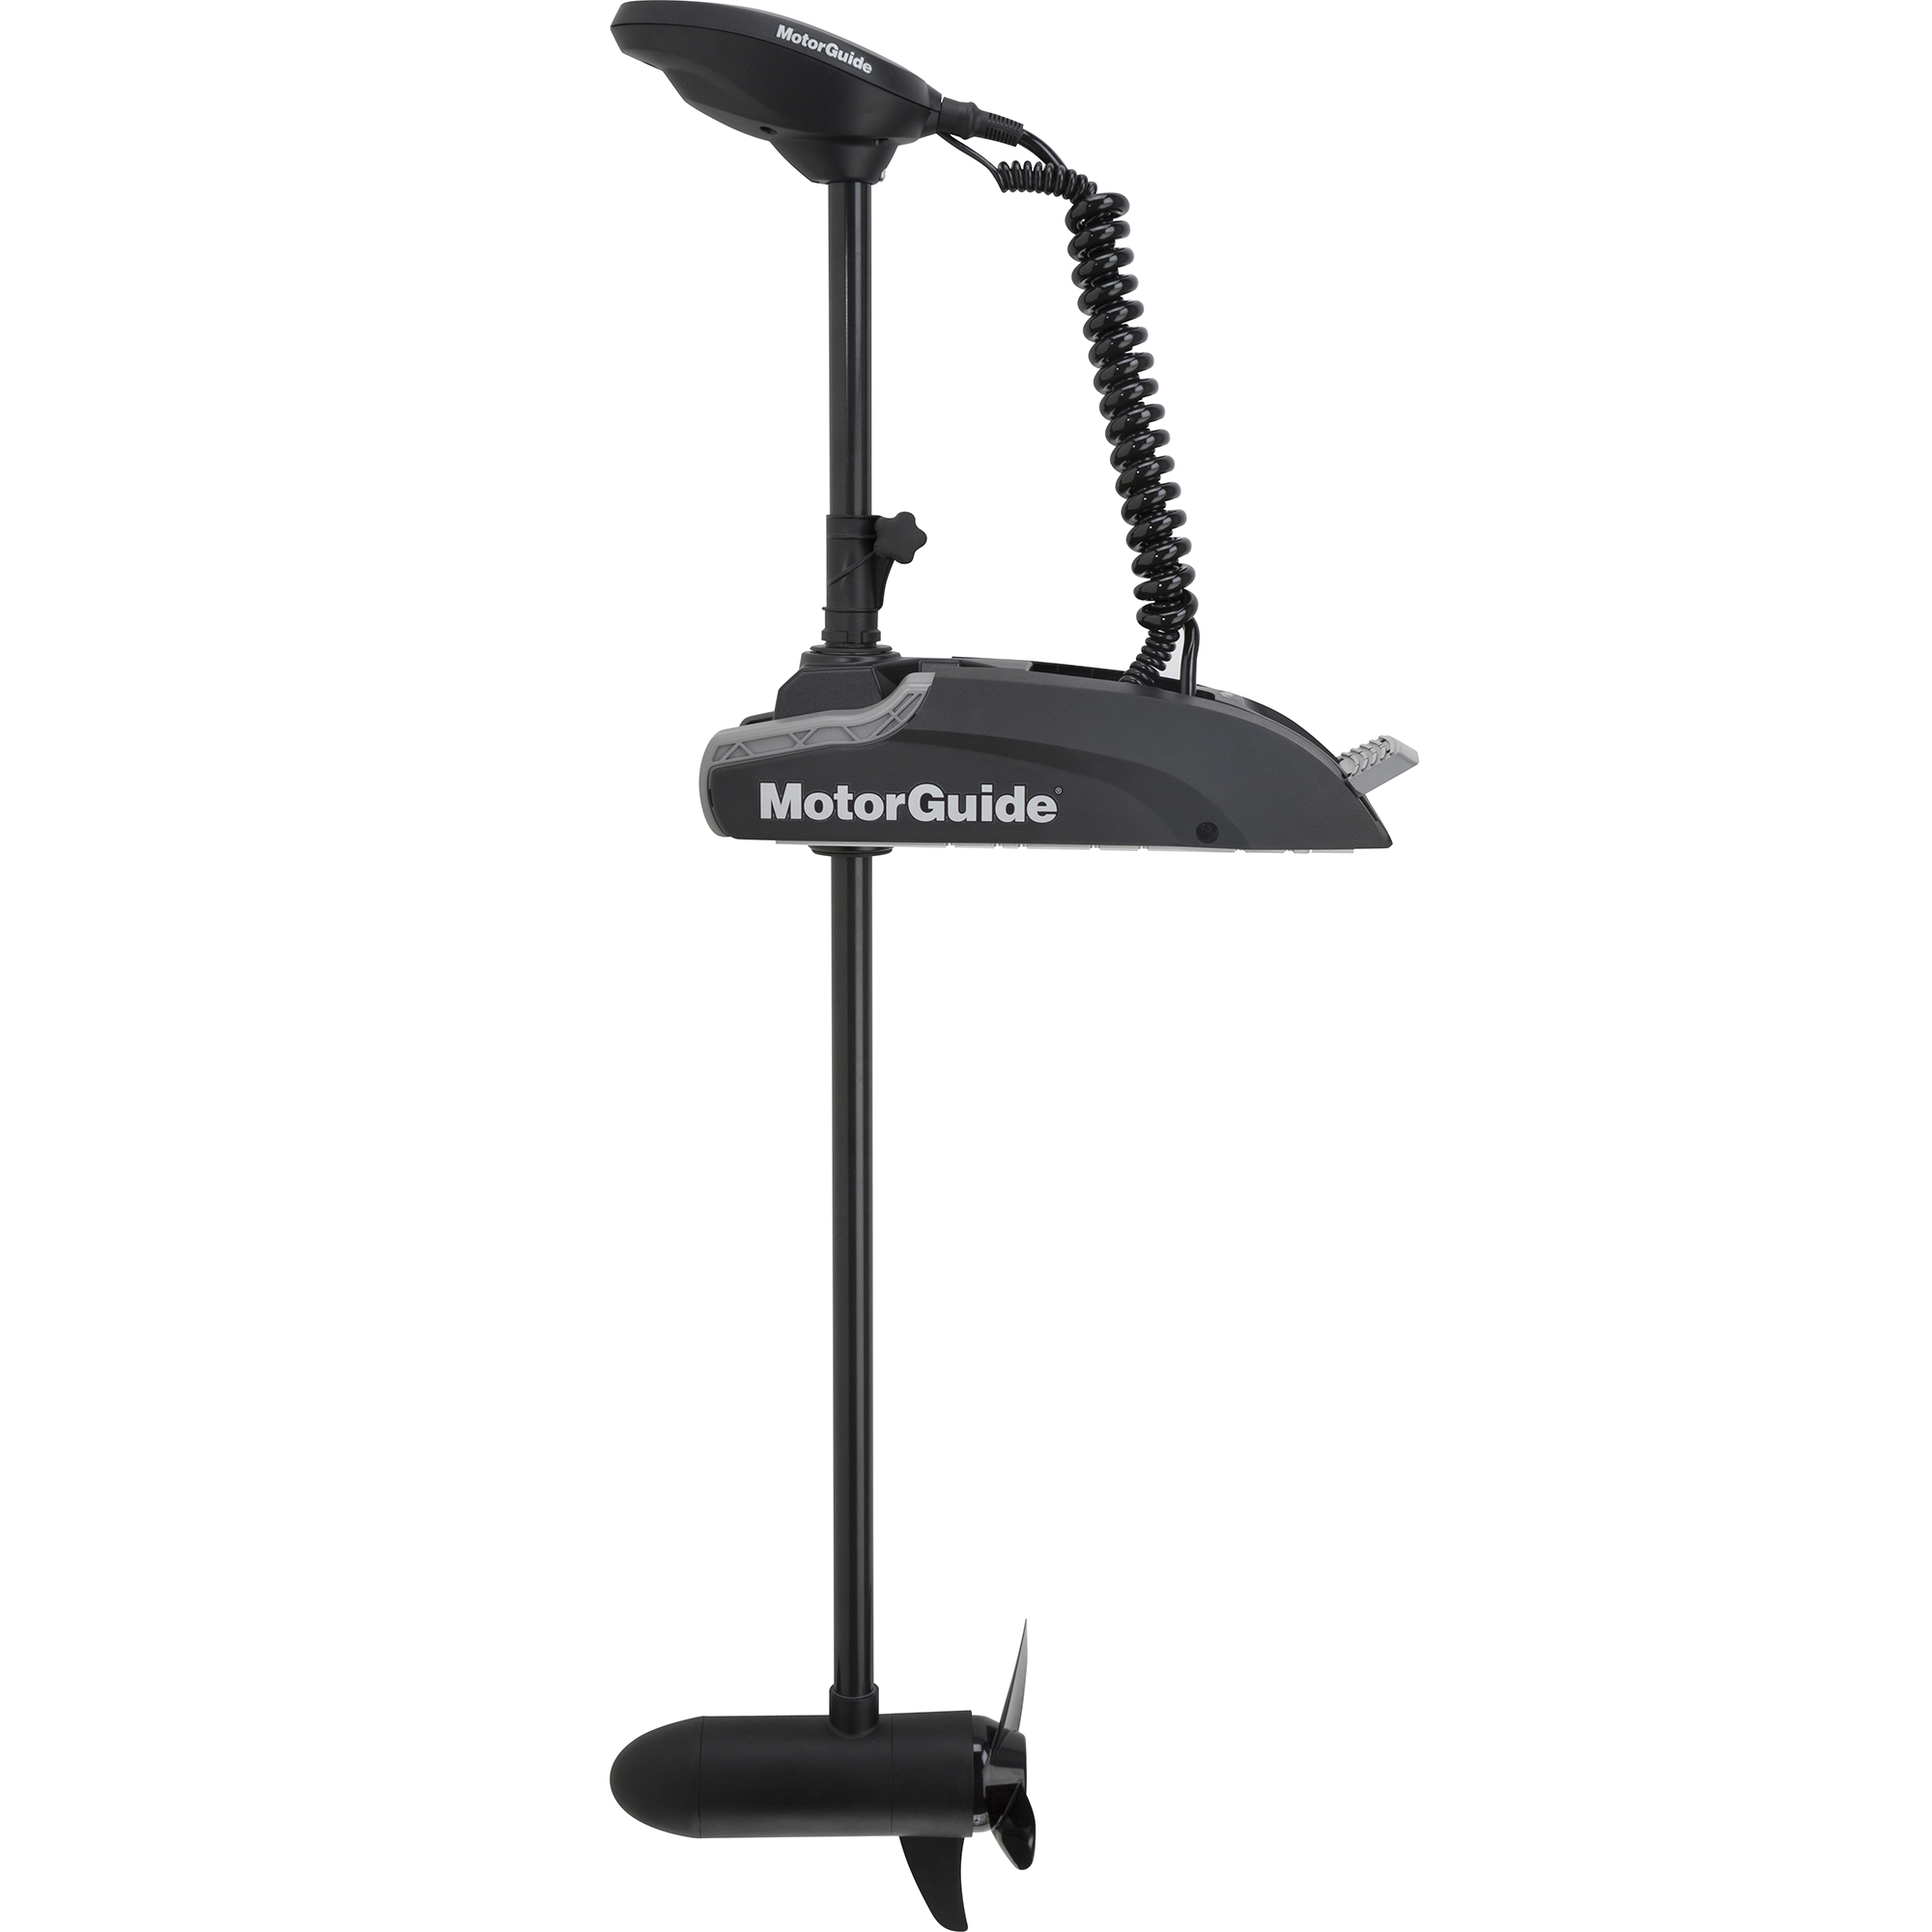 MotorGuide Xi3 Freshwater Wireless Trolling Motor with Pinpoint GPS, 70-lb. 54"